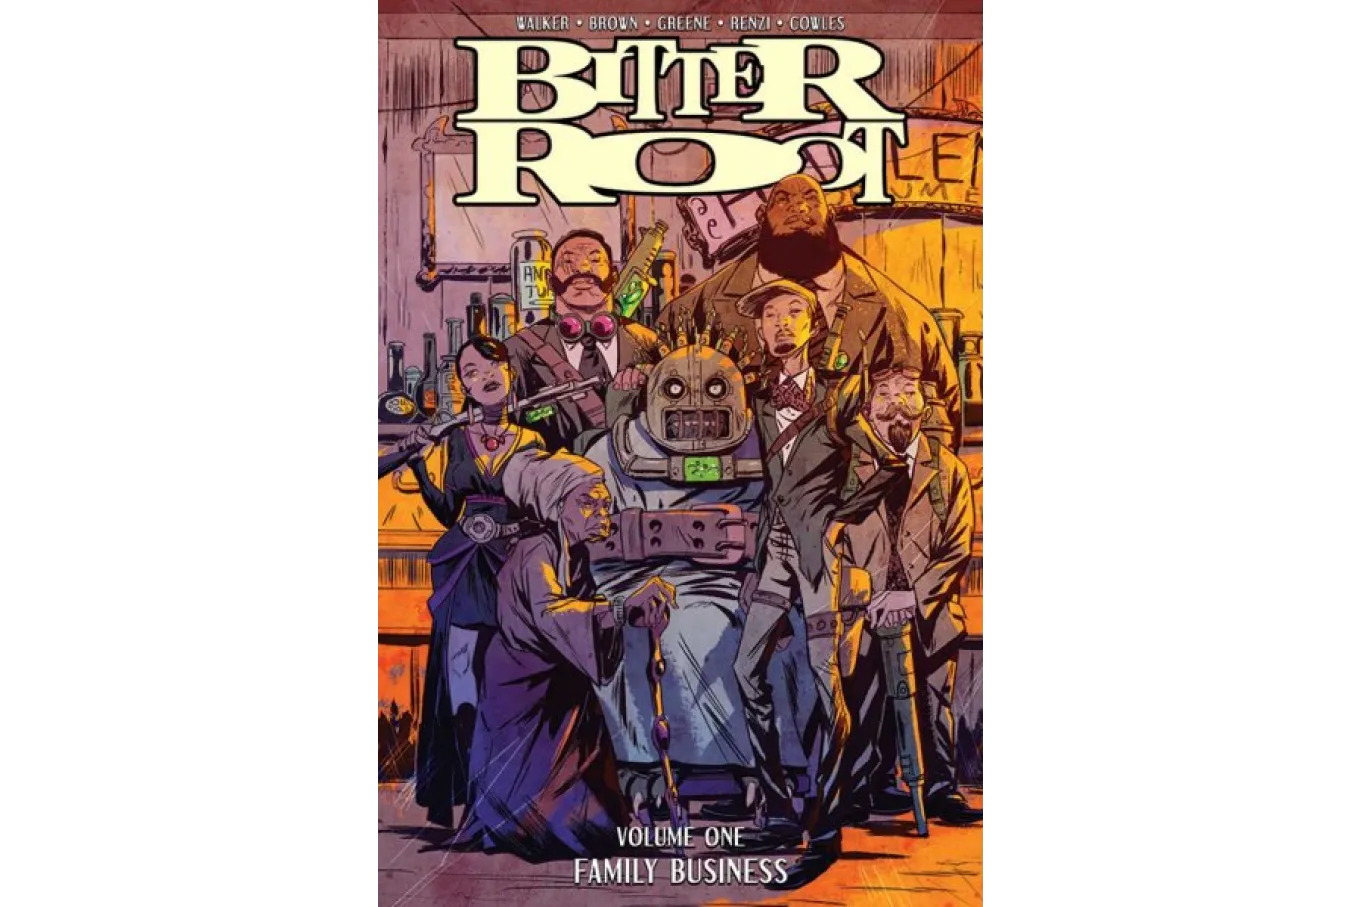 Cover image - a motley crew of characters pose in front of an old-fashioned bar; they are dressed in steampunk/Western garb and are holding classic and futuristic-looking long guns.